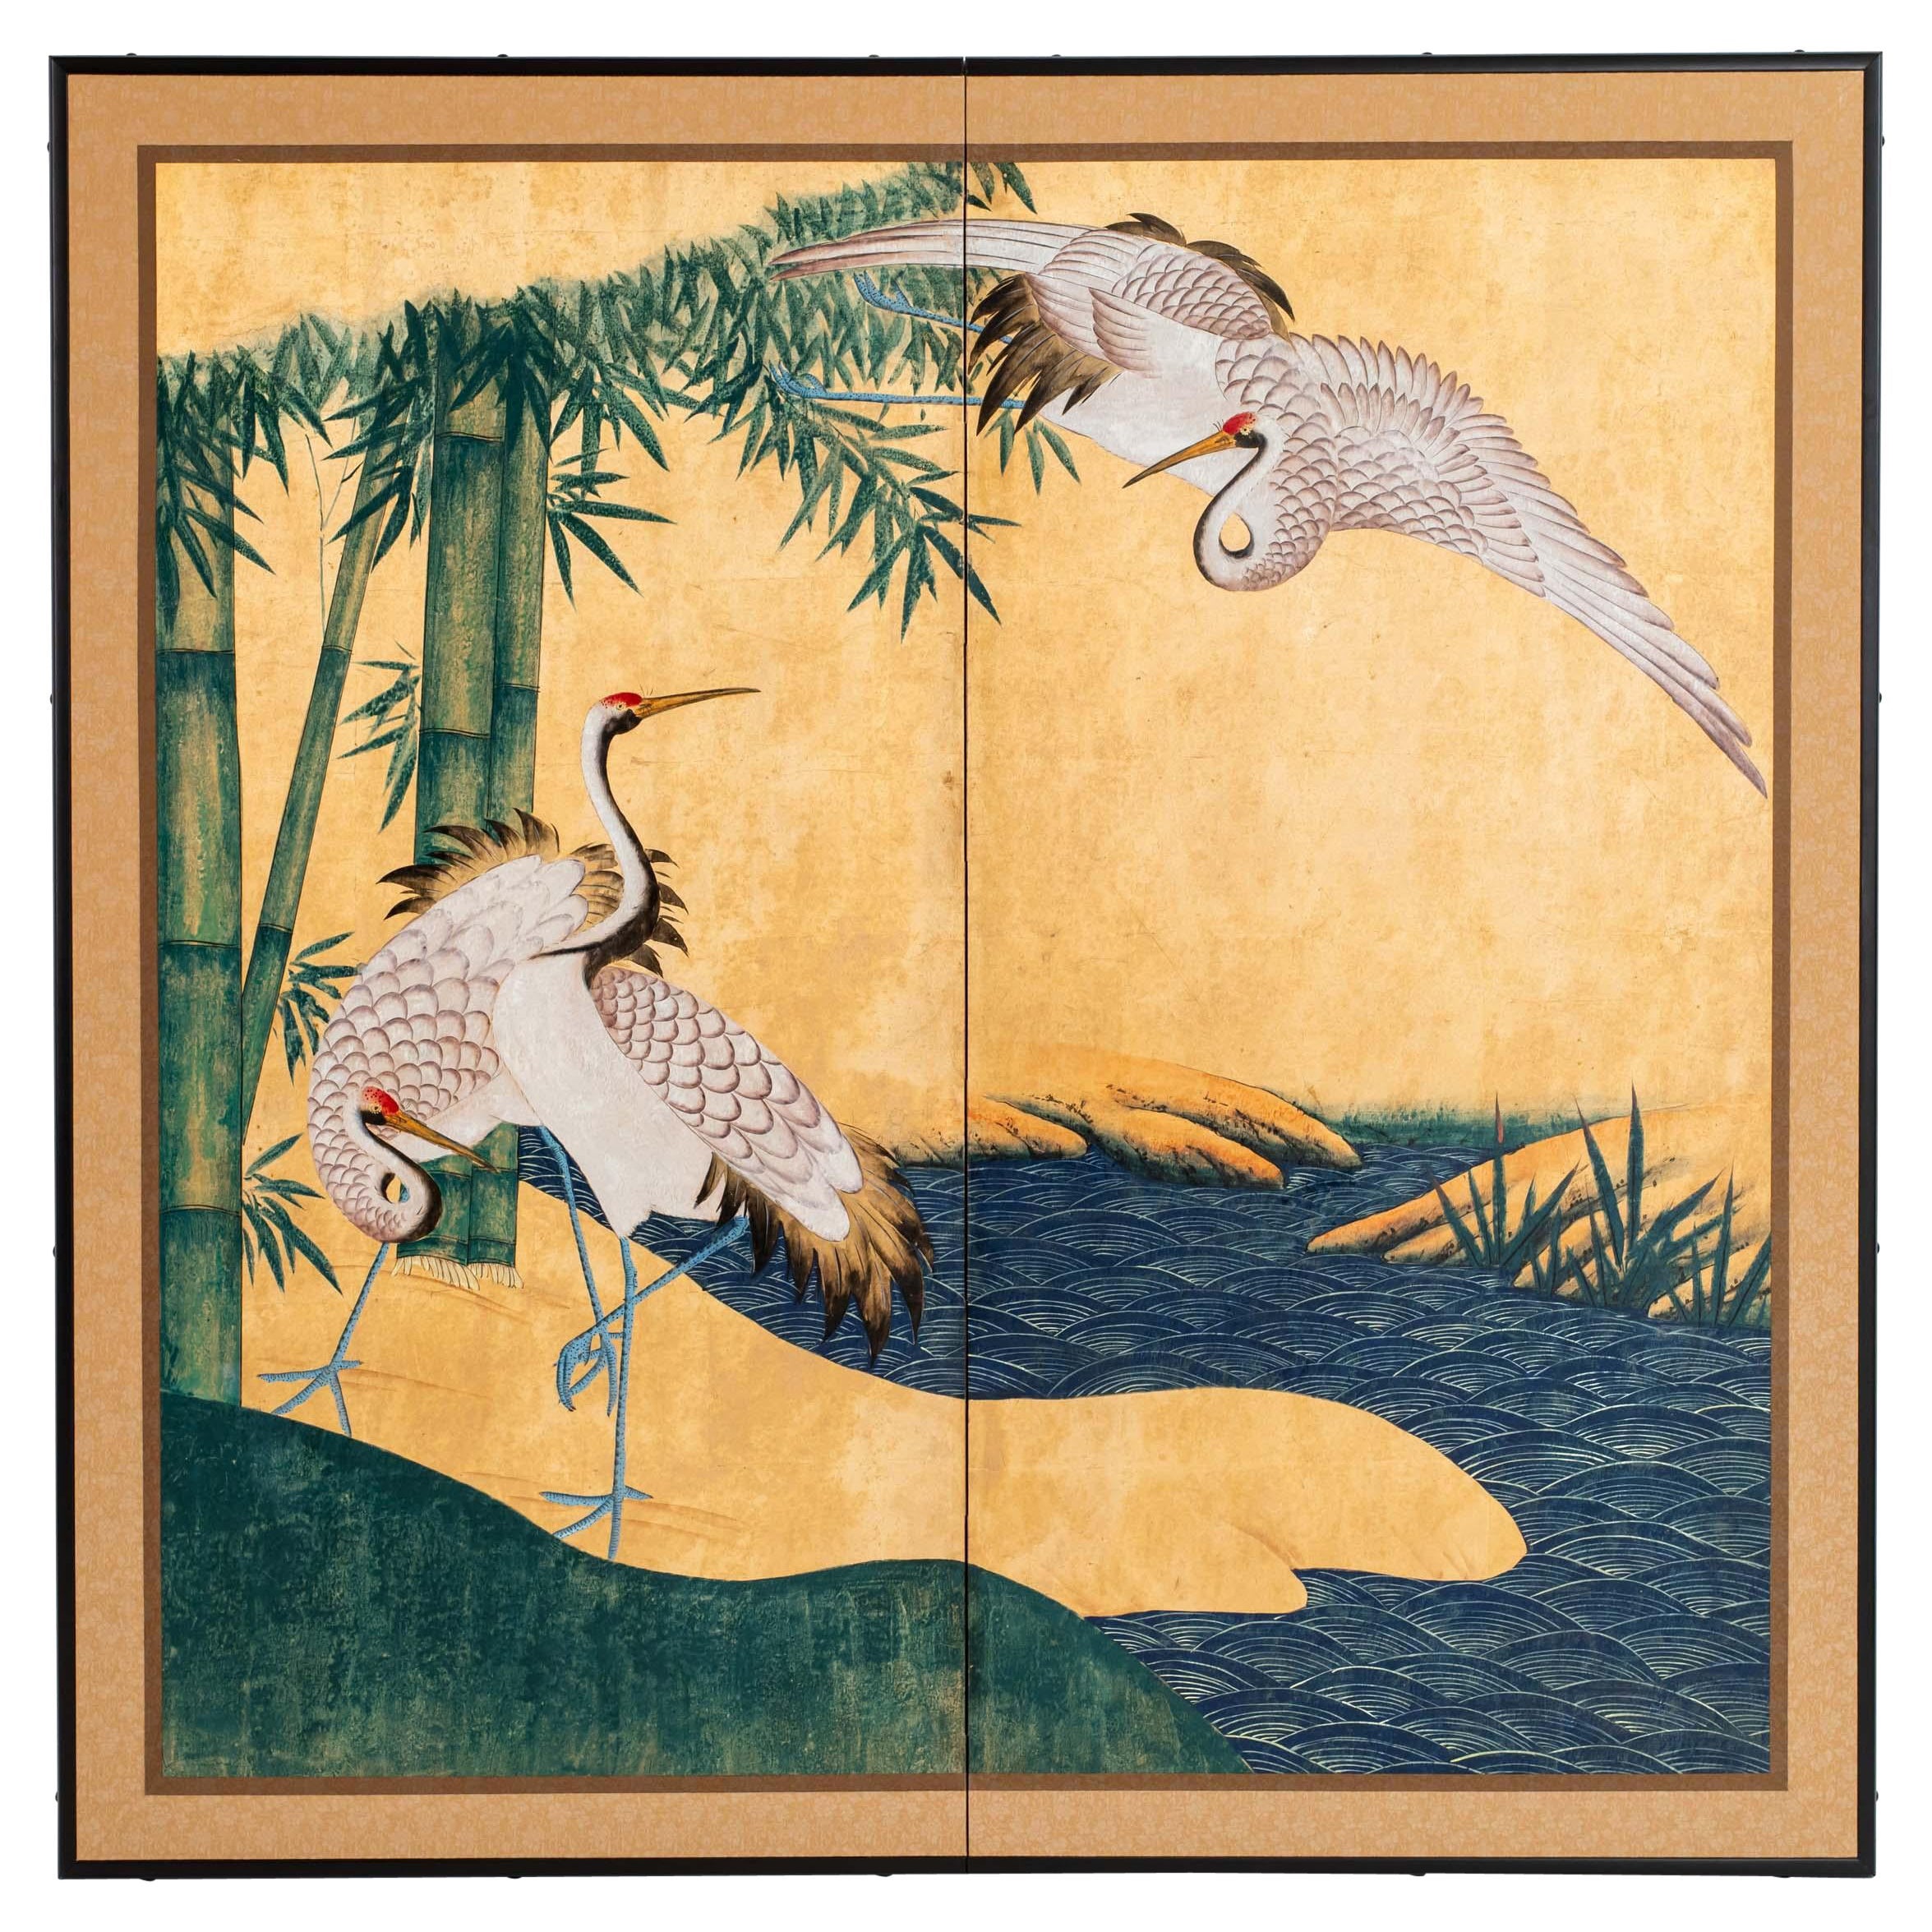 Contemporary Hand-Painted Japanese Screen of Cranes by the River im Angebot